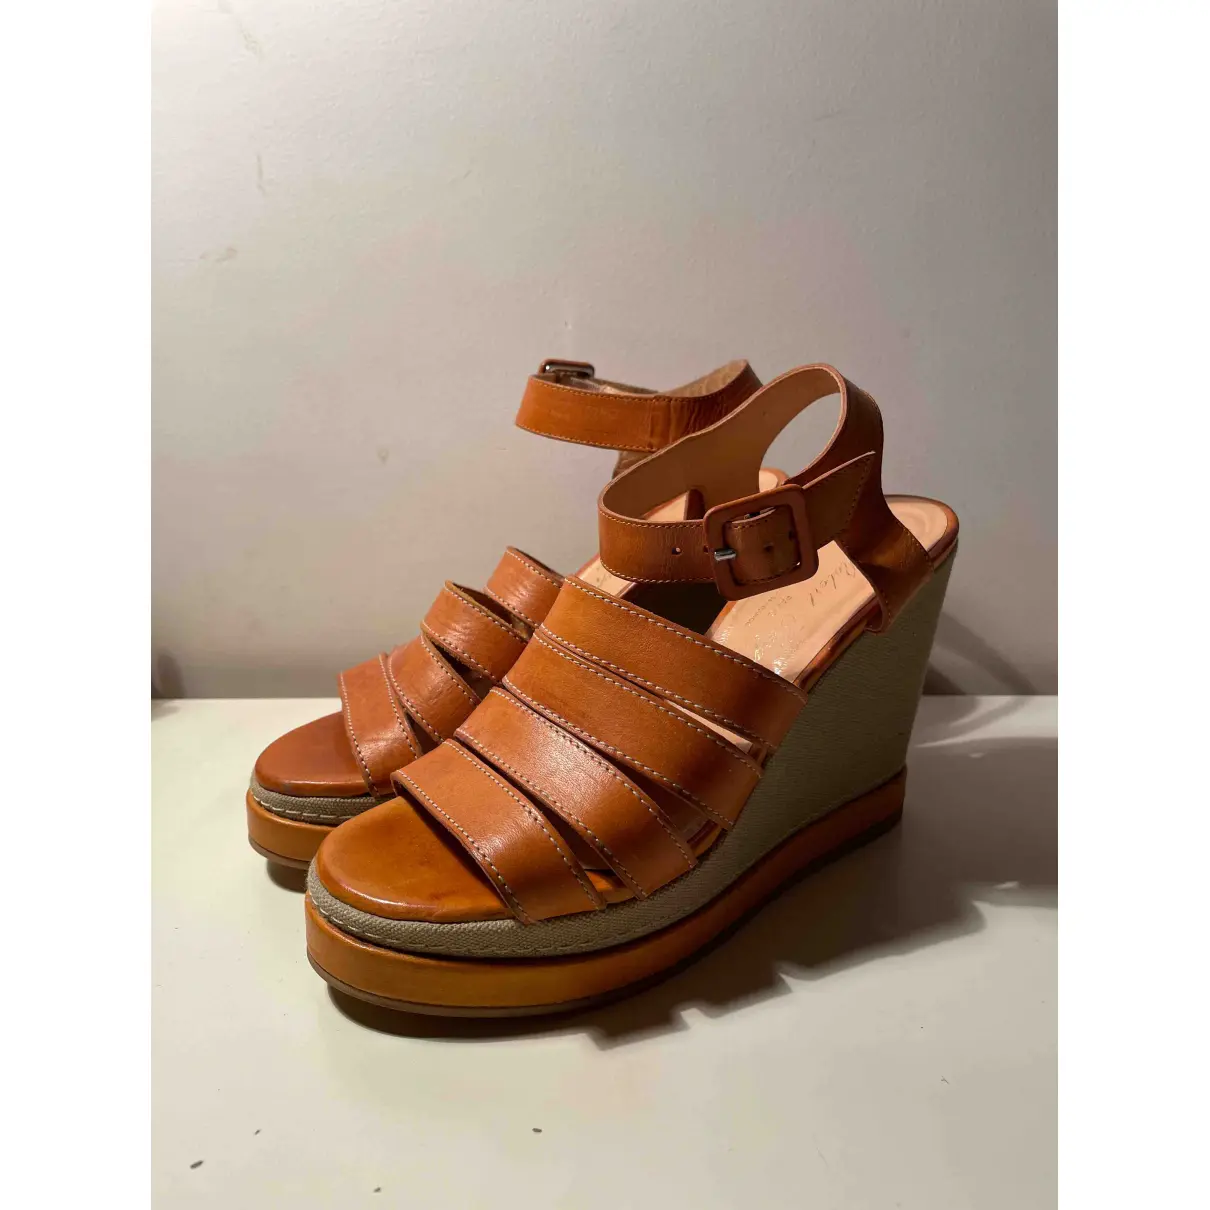 Buy Robert Clergerie Leather sandals online